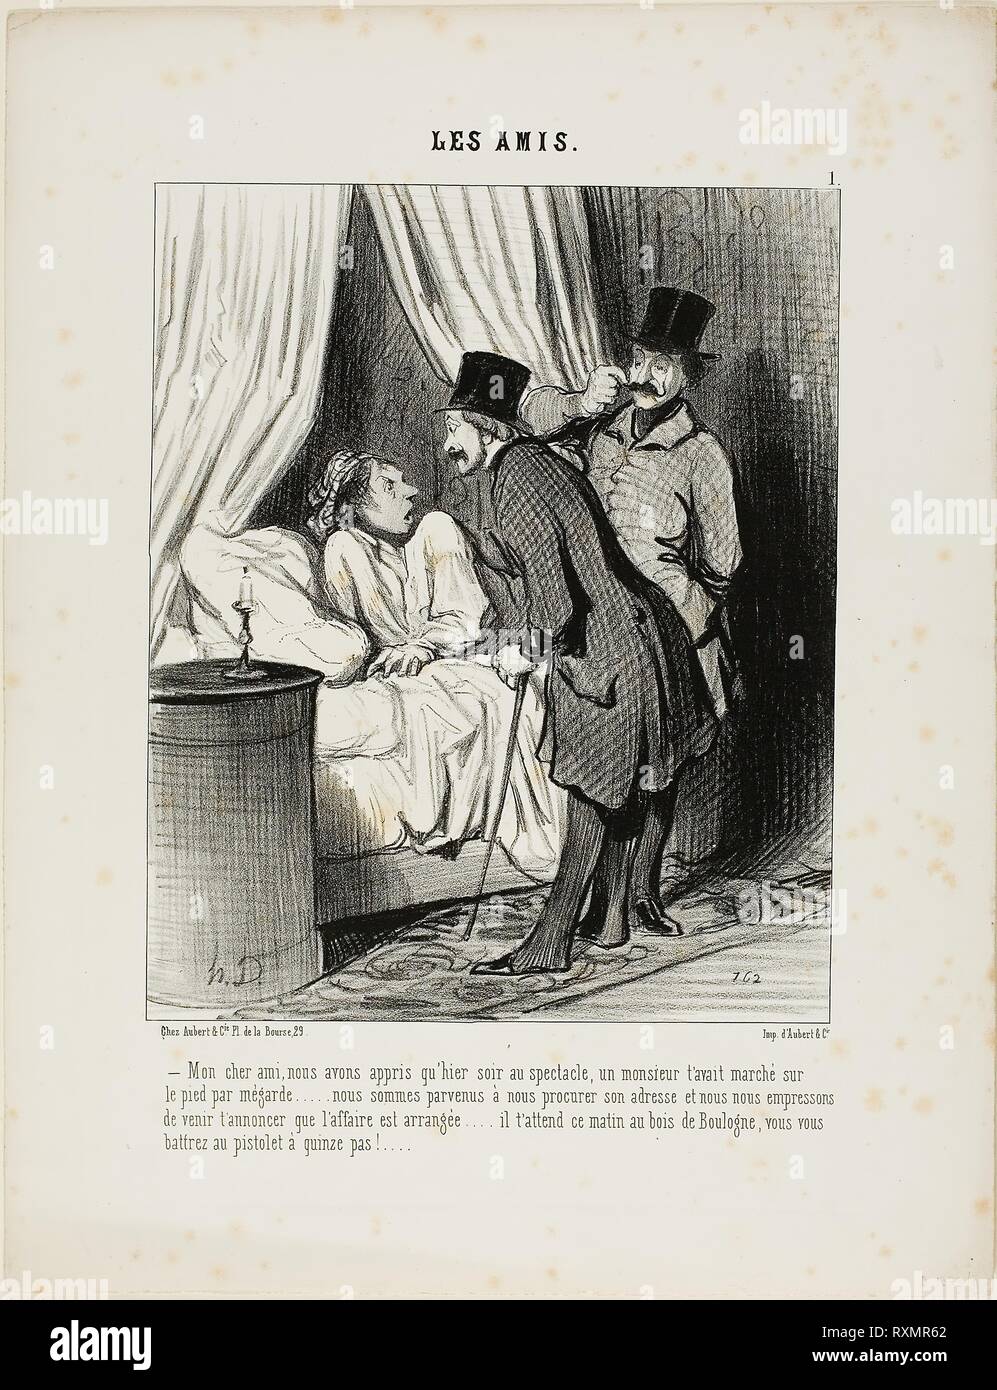 '- My dear friend, we have learned yesterday at the theatre that a gentleman has inadvertedly stepped on your foot.... We have come to get his address and we are eager to announce that the affair is arranged.... He is waiting for you this morning in the Bois de Boulogne. You will raise pistols at a distance of 15 paces,' plate 1 from Les Amis. Honoré Victorin Daumier; French, 1808-1879. Date: 1845. Dimensions: 231 × 190 mm (image); 358 × 275 mm (sheet). Lithograph in black on ivory wove paper. Origin: France. Museum: The Chicago Art Institute. Stock Photo